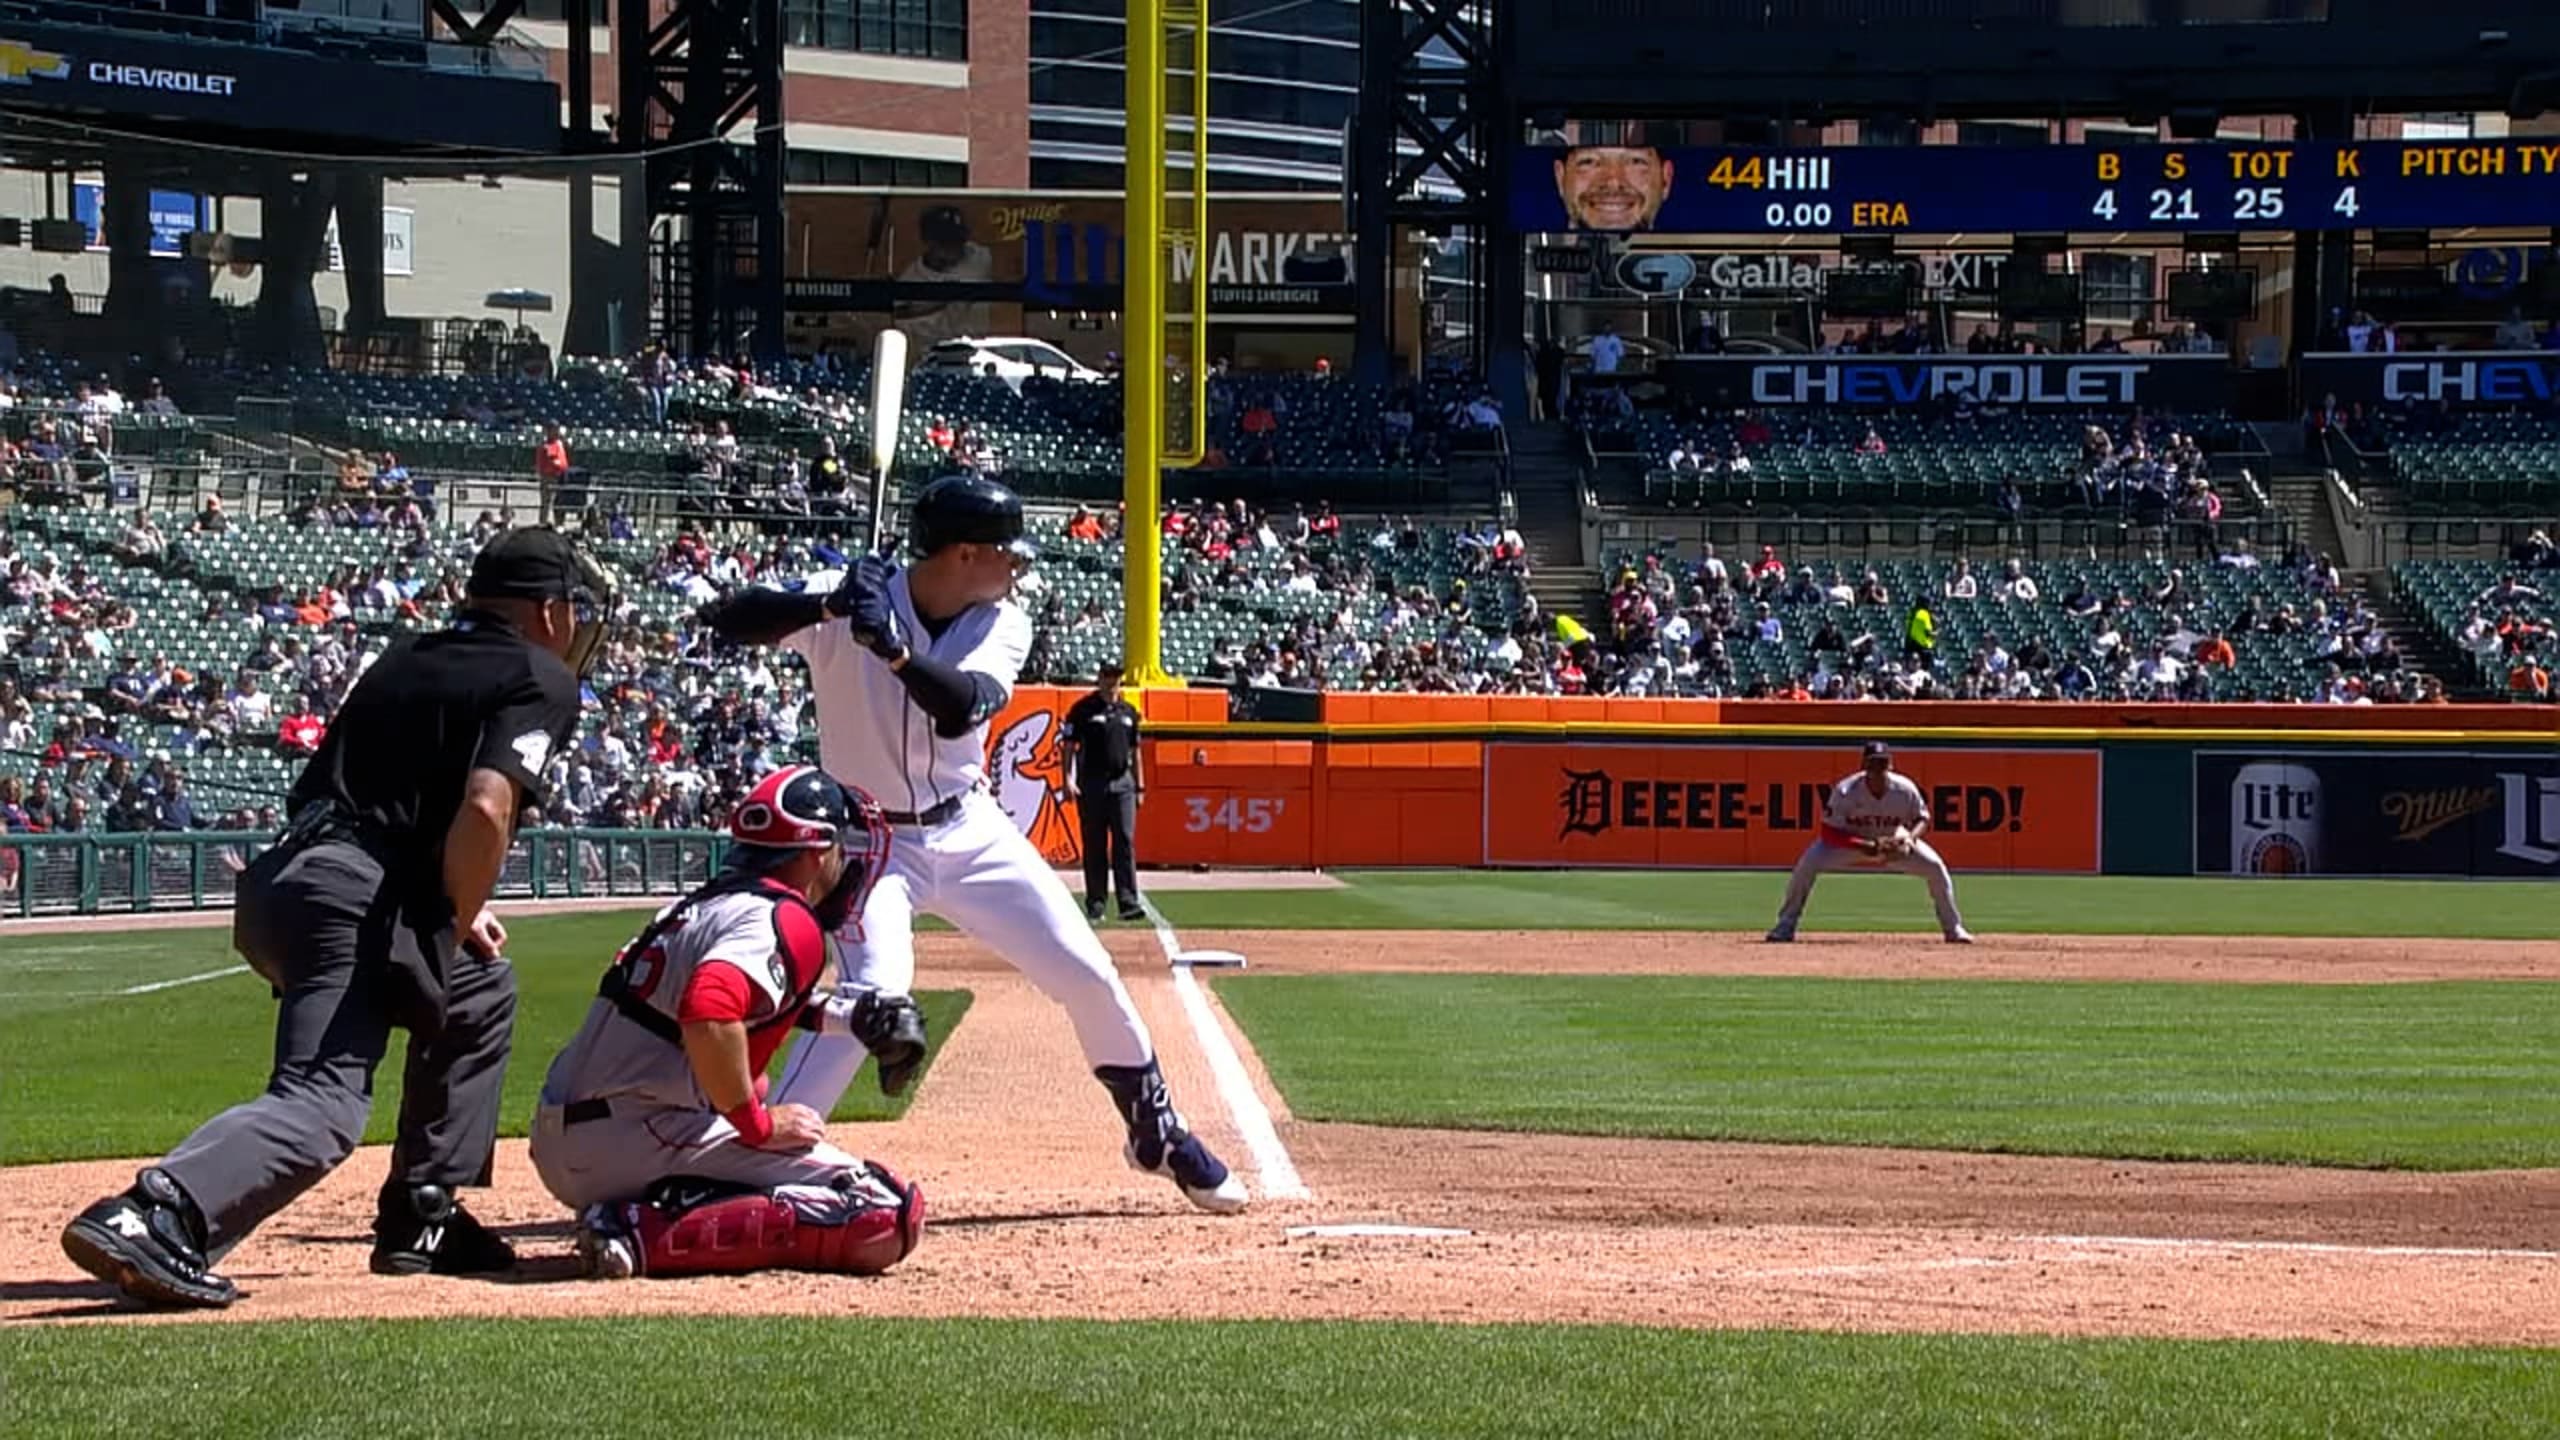 Rookie Torkelson's 2-run homer sends Tigers past Royals, 2-1 – The